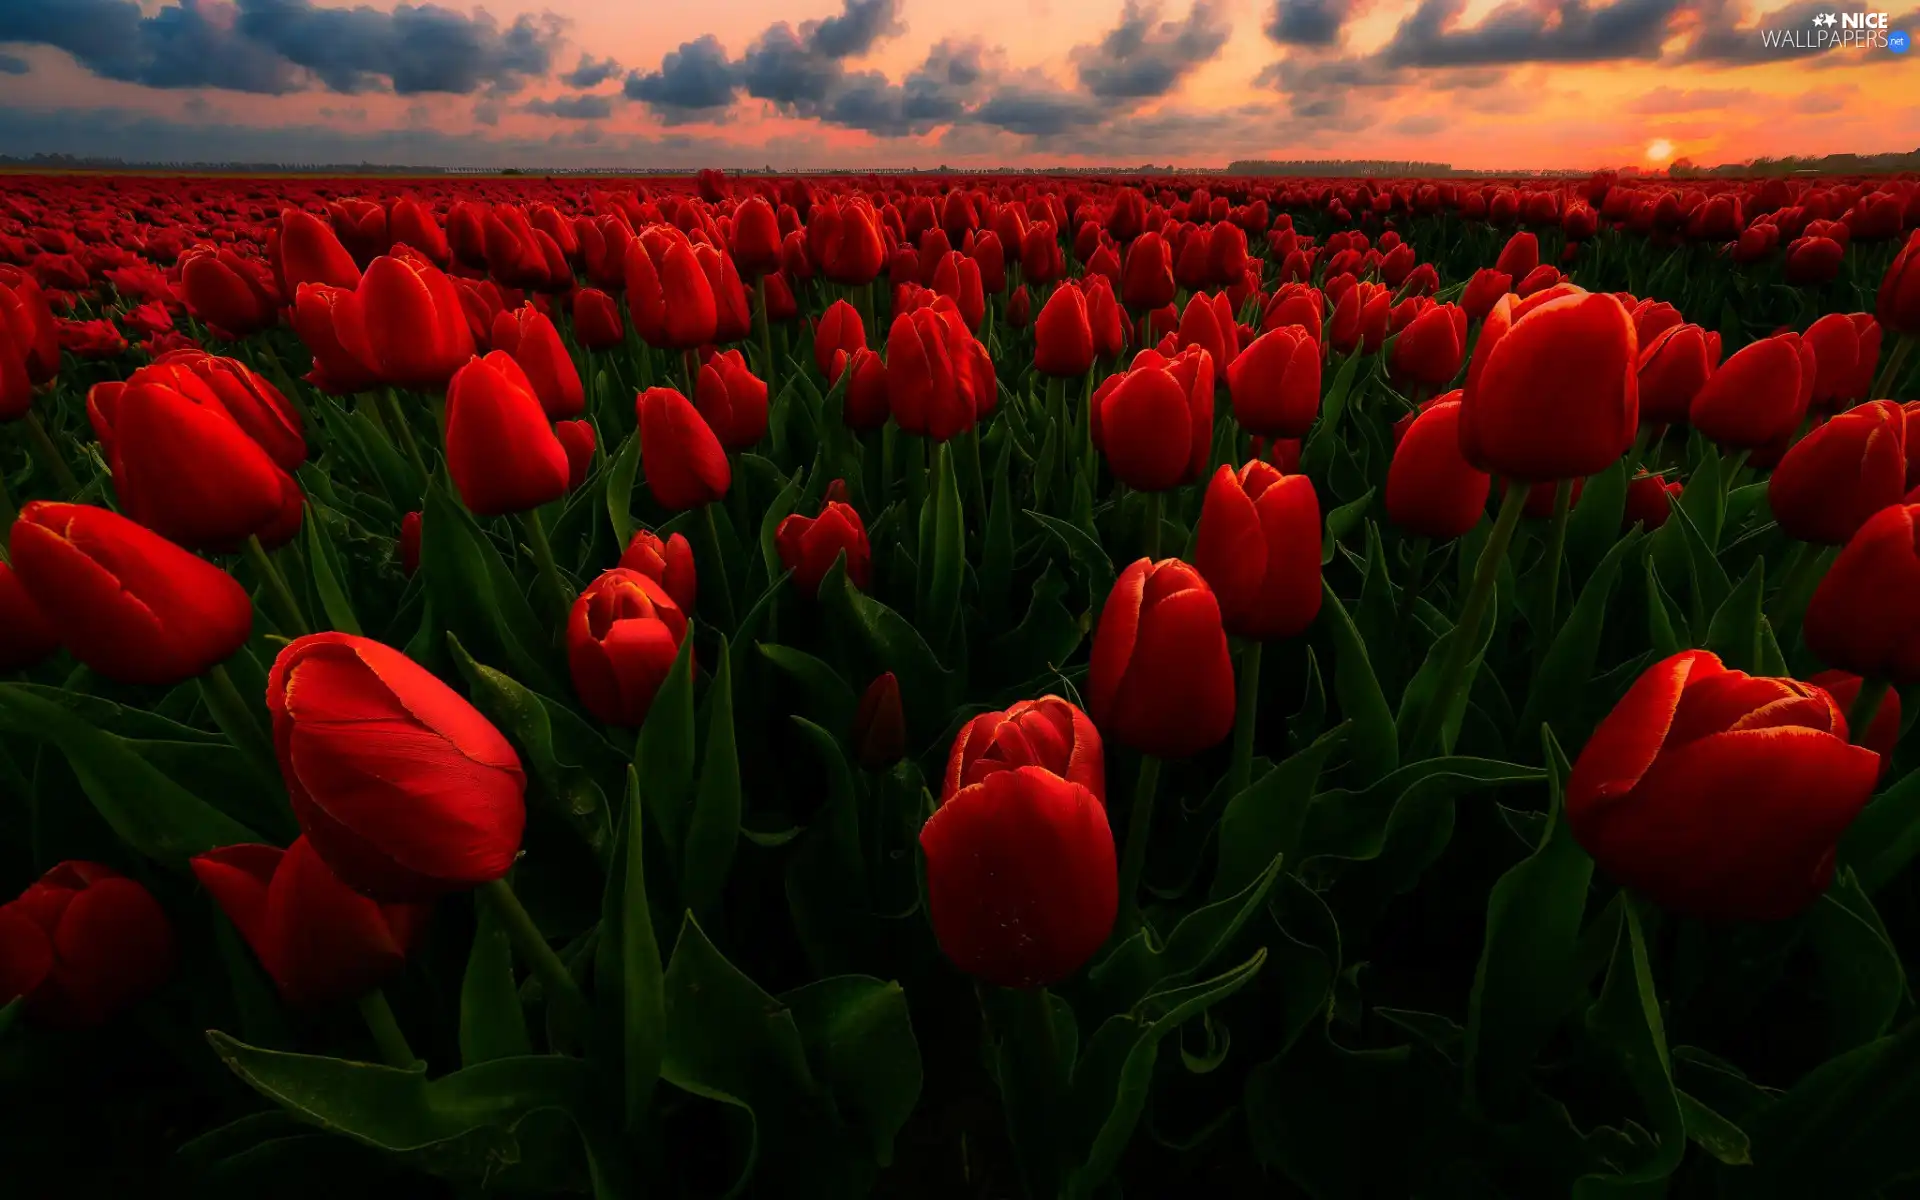 Tulips, Red, clouds, Great Sunsets, Field, Flowers